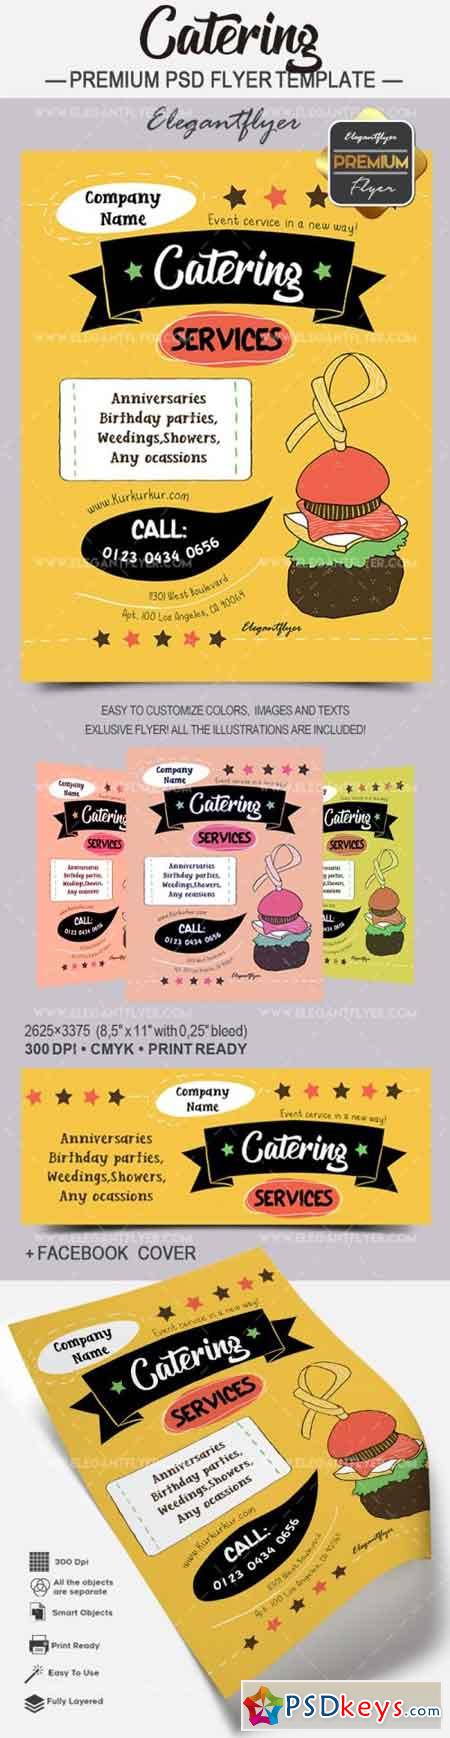 Catering  Premium Flyer PSD Template + Facebook Cover